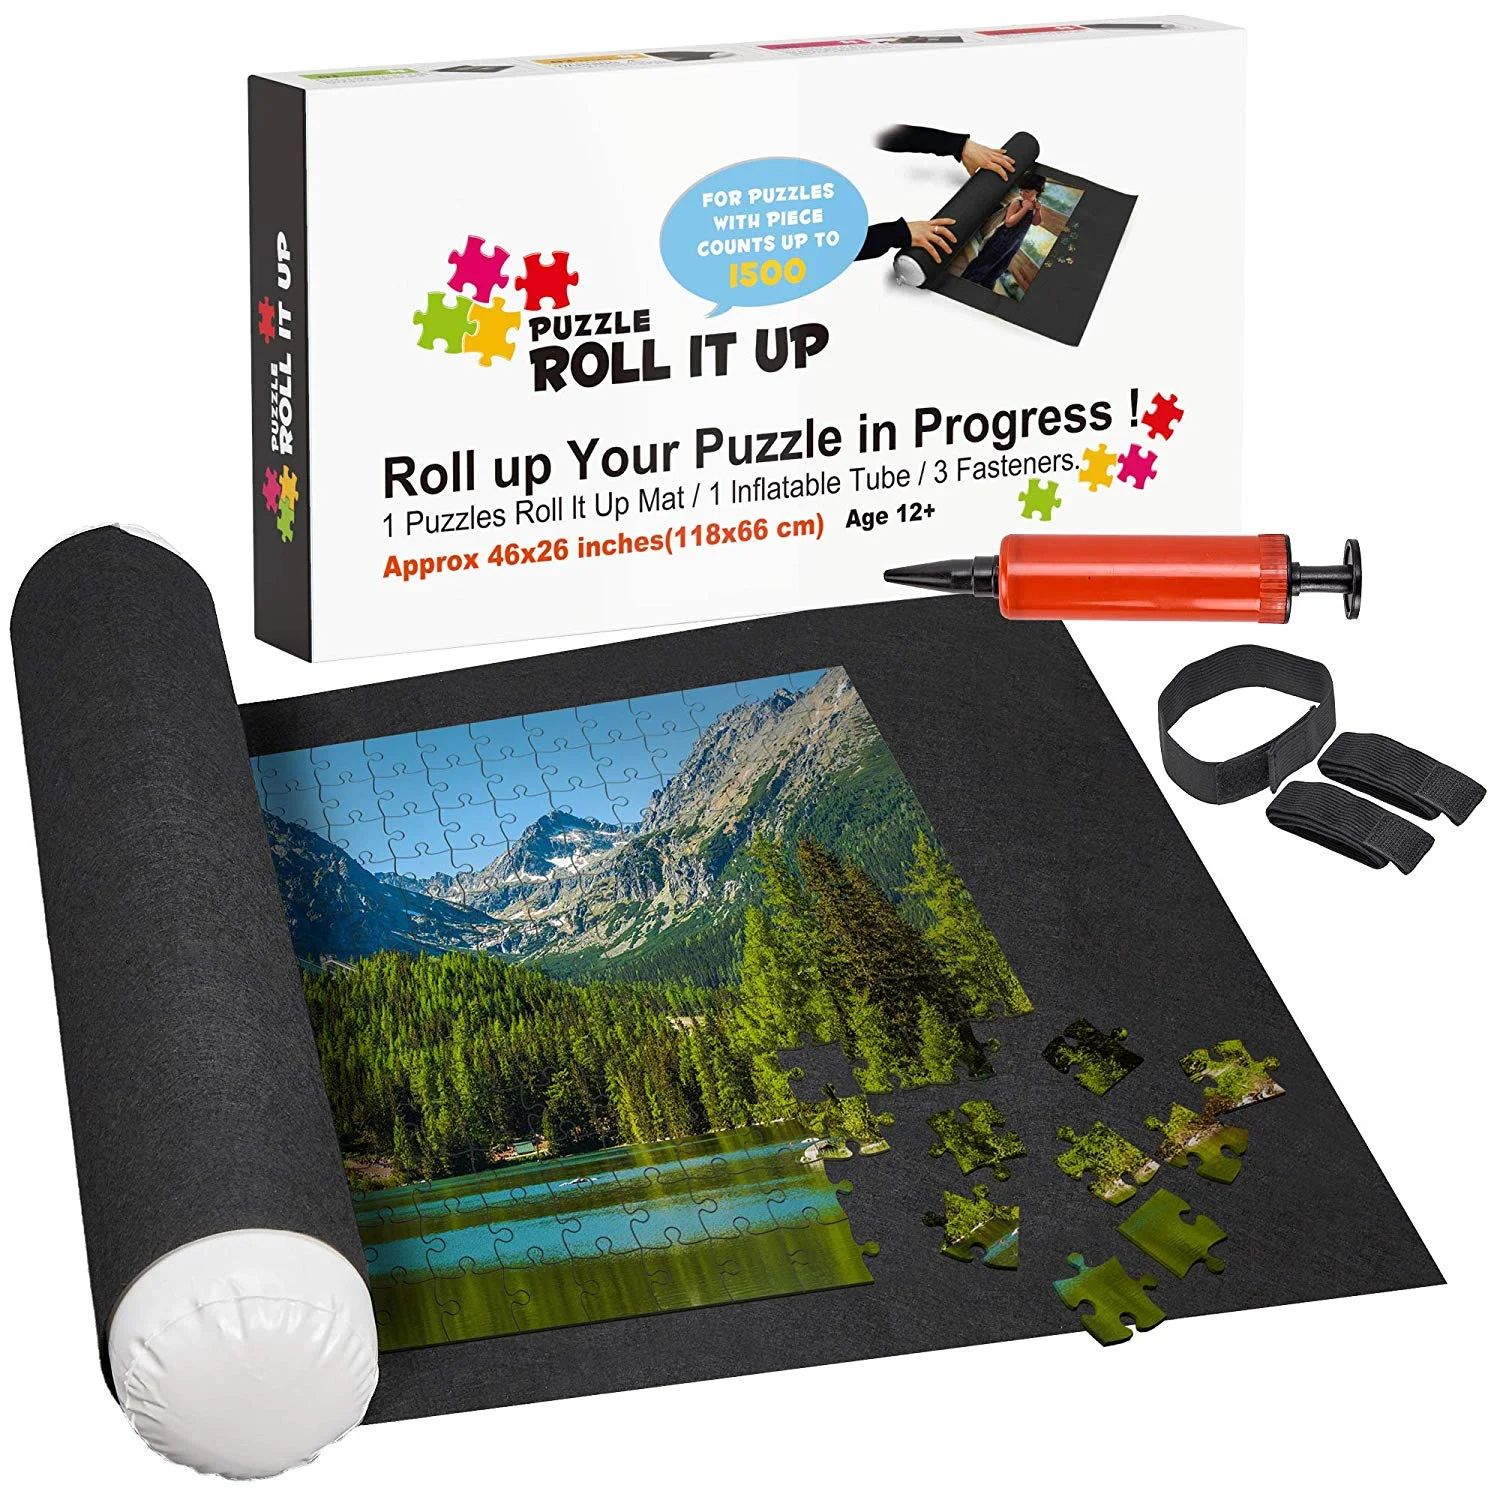 Puzzle Roll Up Mat Premium Pump - Store and Transport Jigsaw Puzzles Up to 1500 Pieces - 46" x 26... | Walmart (US)